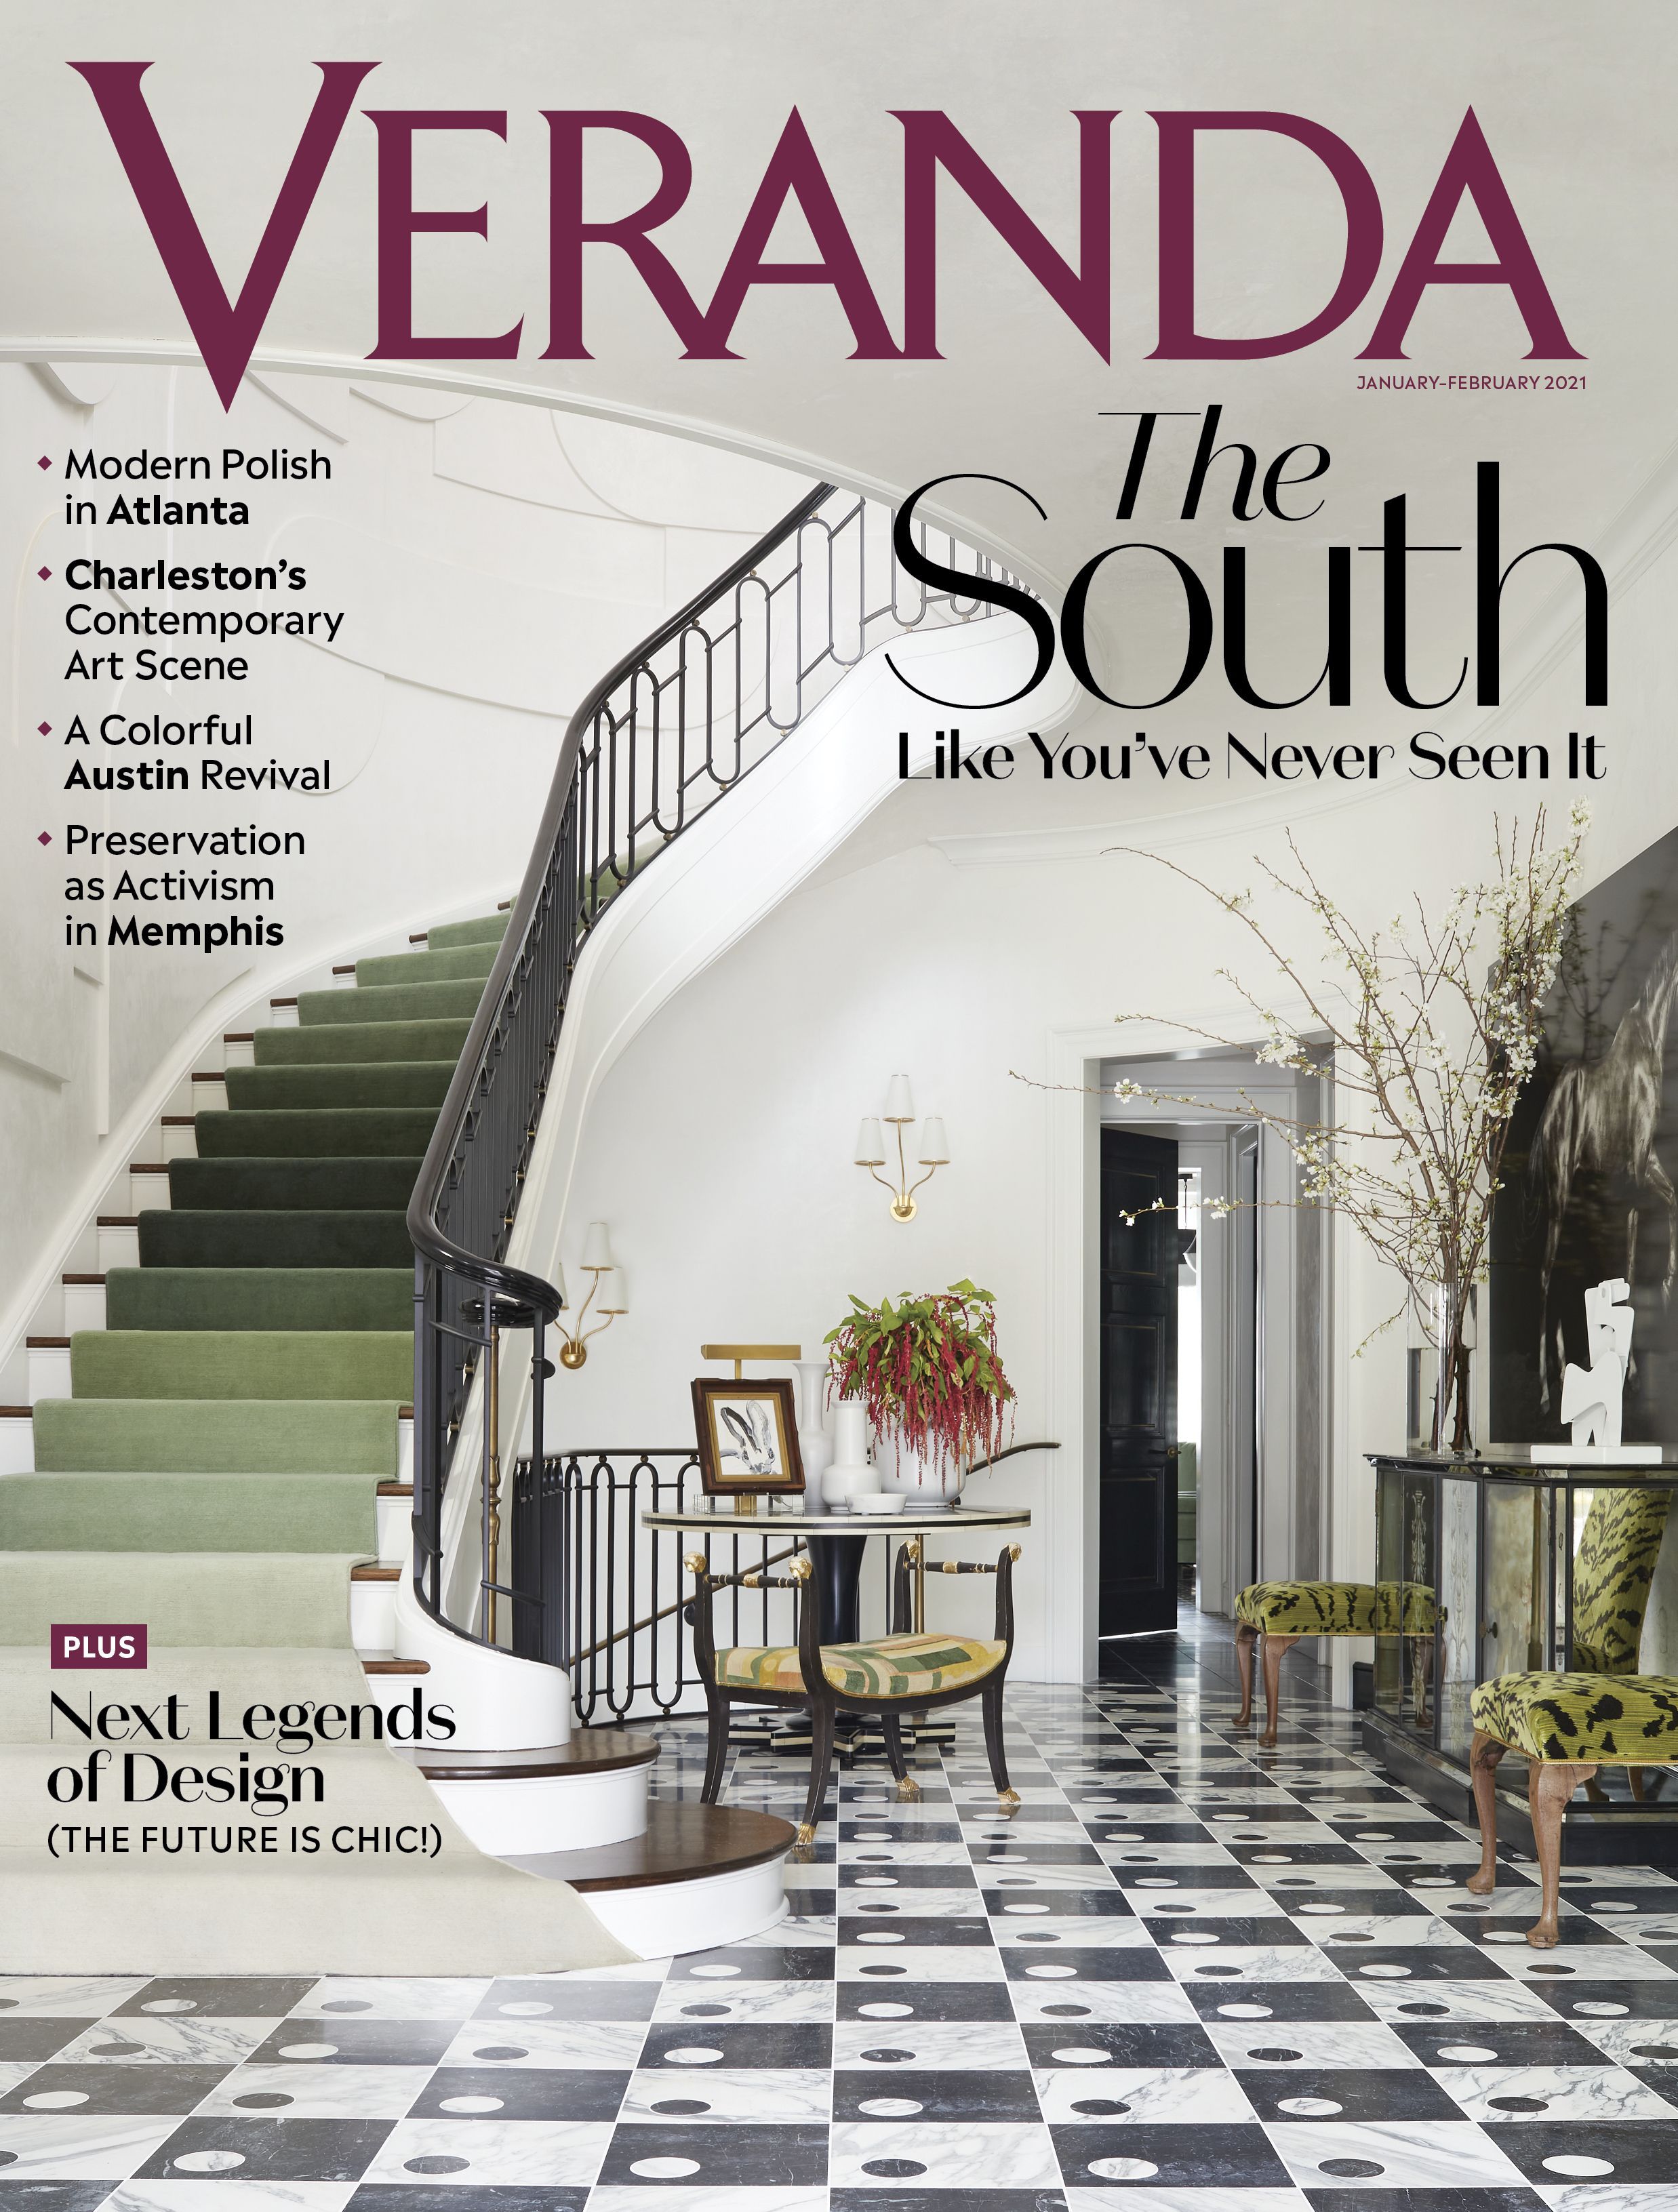 This article originally appeared in the January/February 2021 issue of VERANDA.